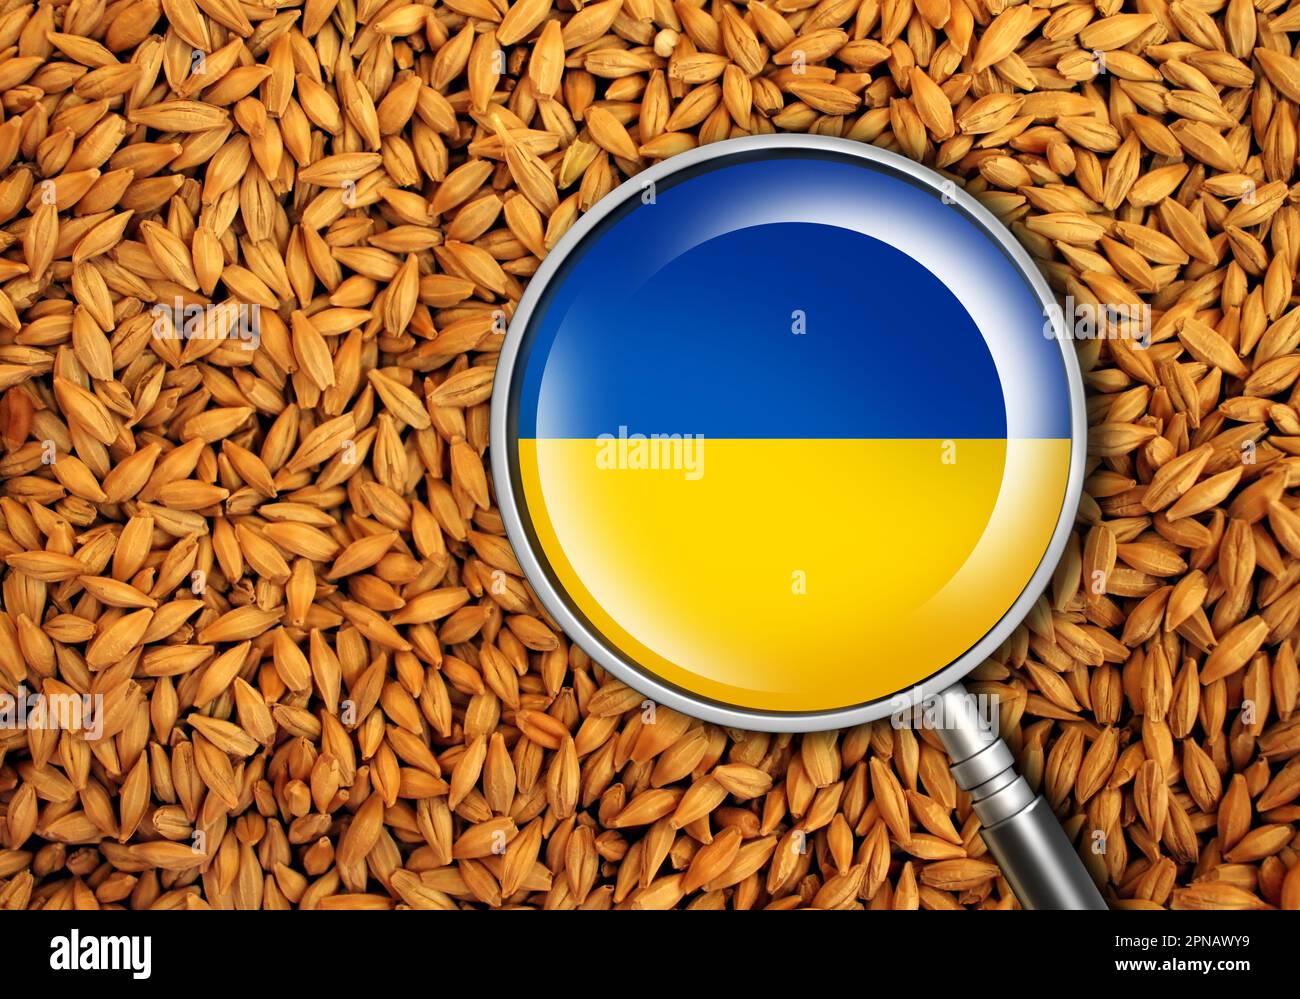 Ukrainian Wheat Issues and Ukraine grain exports as a symbol of Global food Supply with 3D illustration elements. Stock Photo